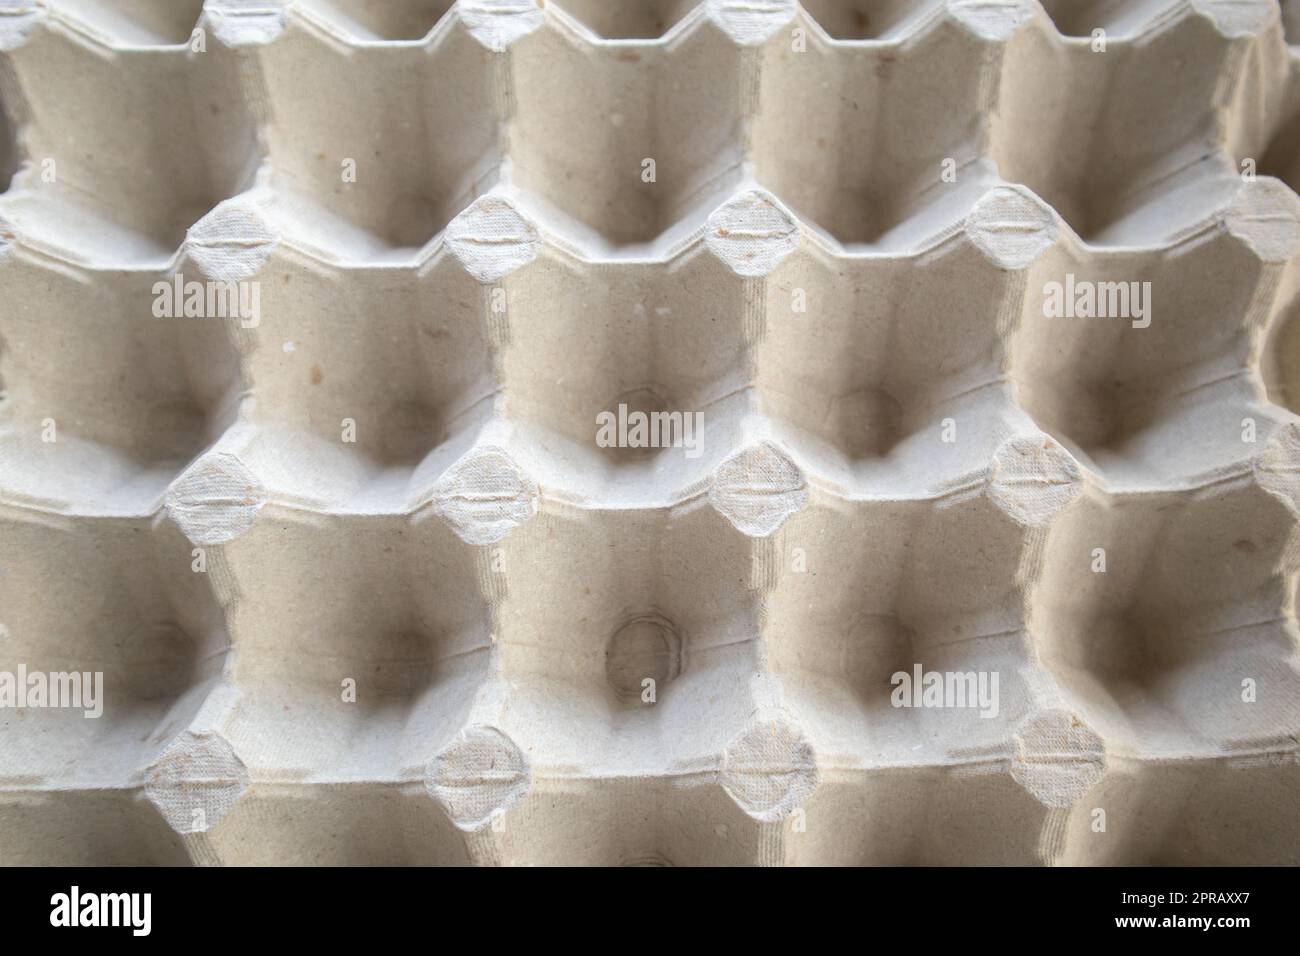 Top view of an empty cardboard egg tray. Background texture of a container made of biodegradable paper packaging with a repeating pattern Stock Photo